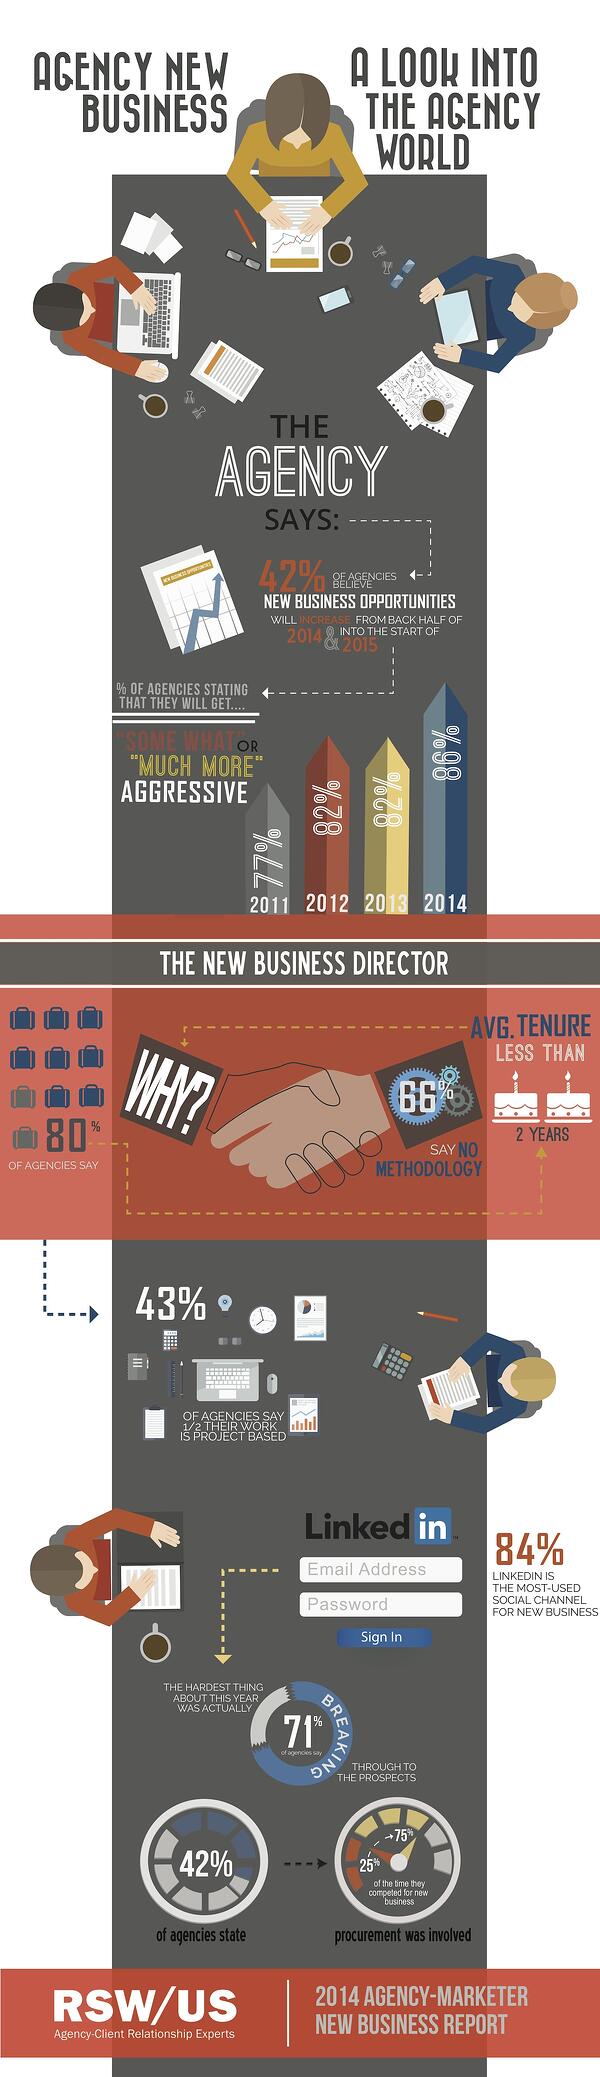 Agency-New-Business-A-Look-Into-The-Agency-World-RSWUS-Infographic